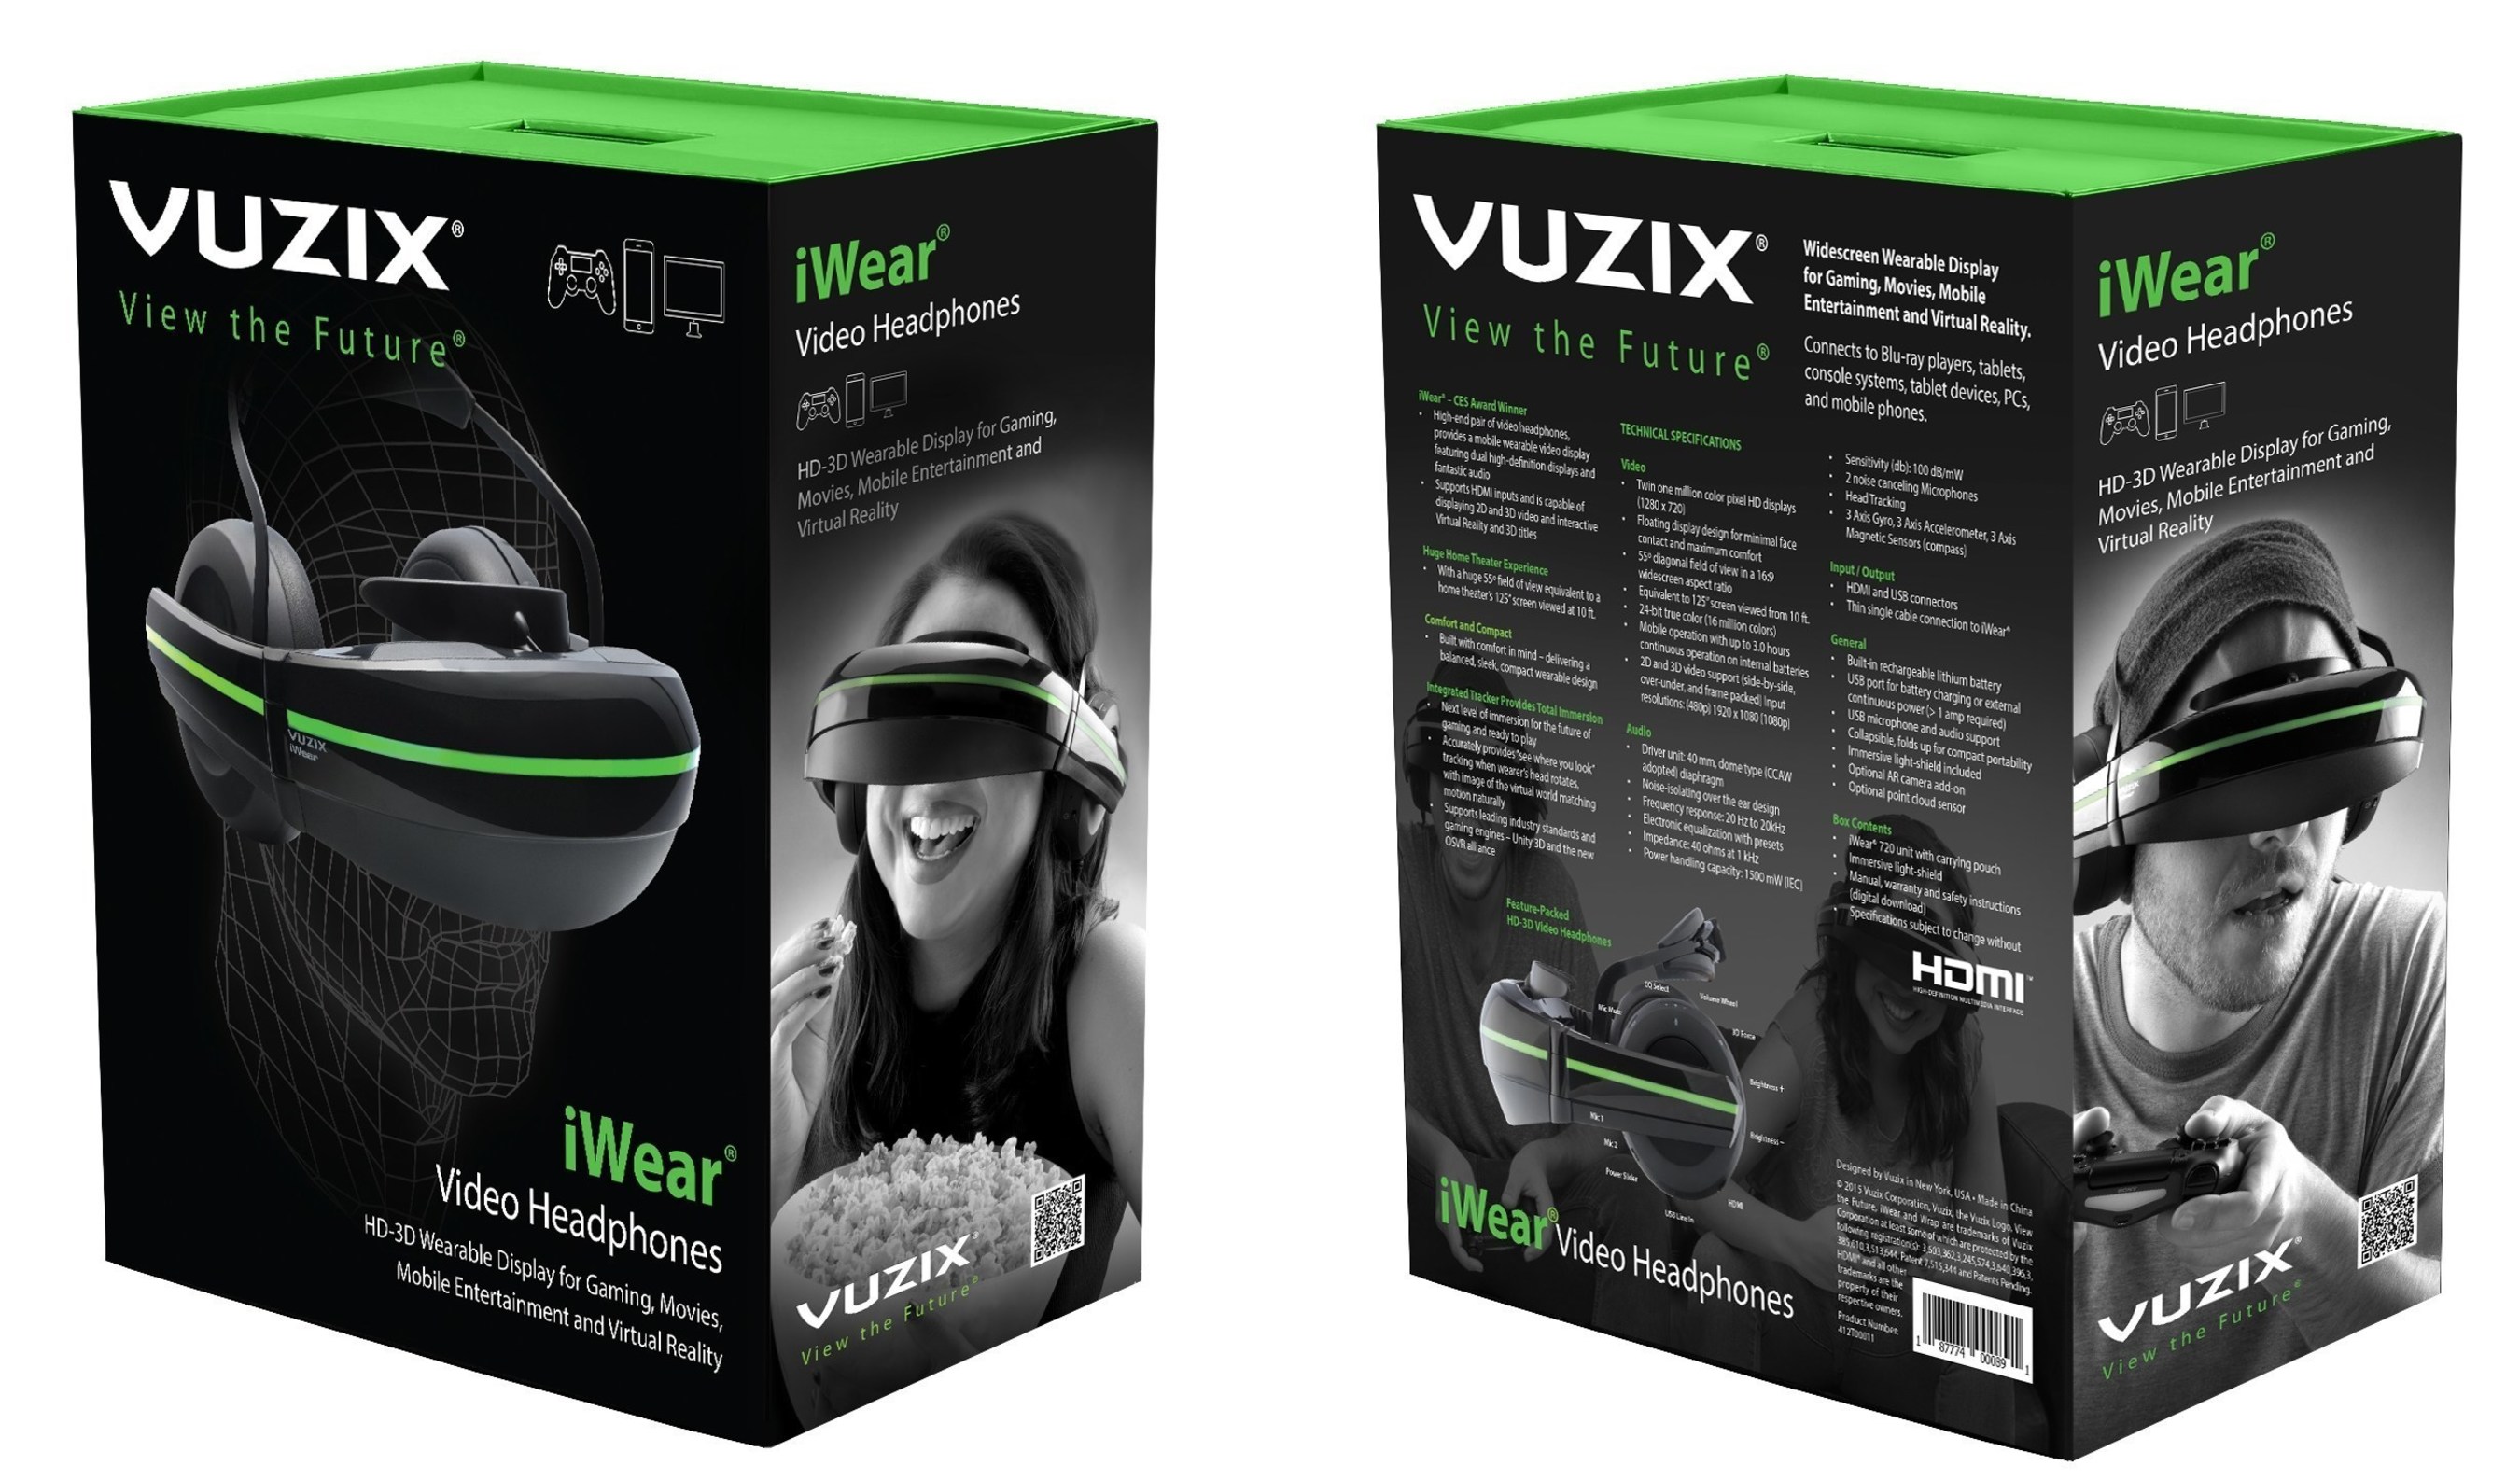 Vuzix Commences First Production Shipments of iWear Video Headphones to Developers